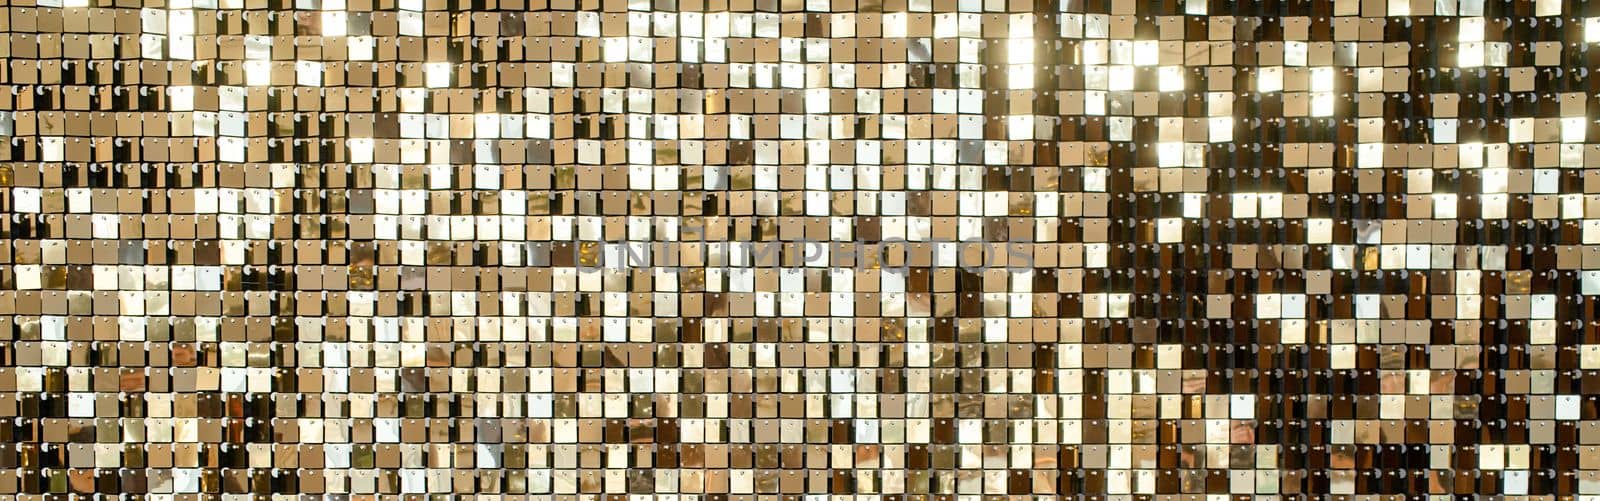 Abstract festive golden background. Golden metal shiny pieces making festive abstract texture